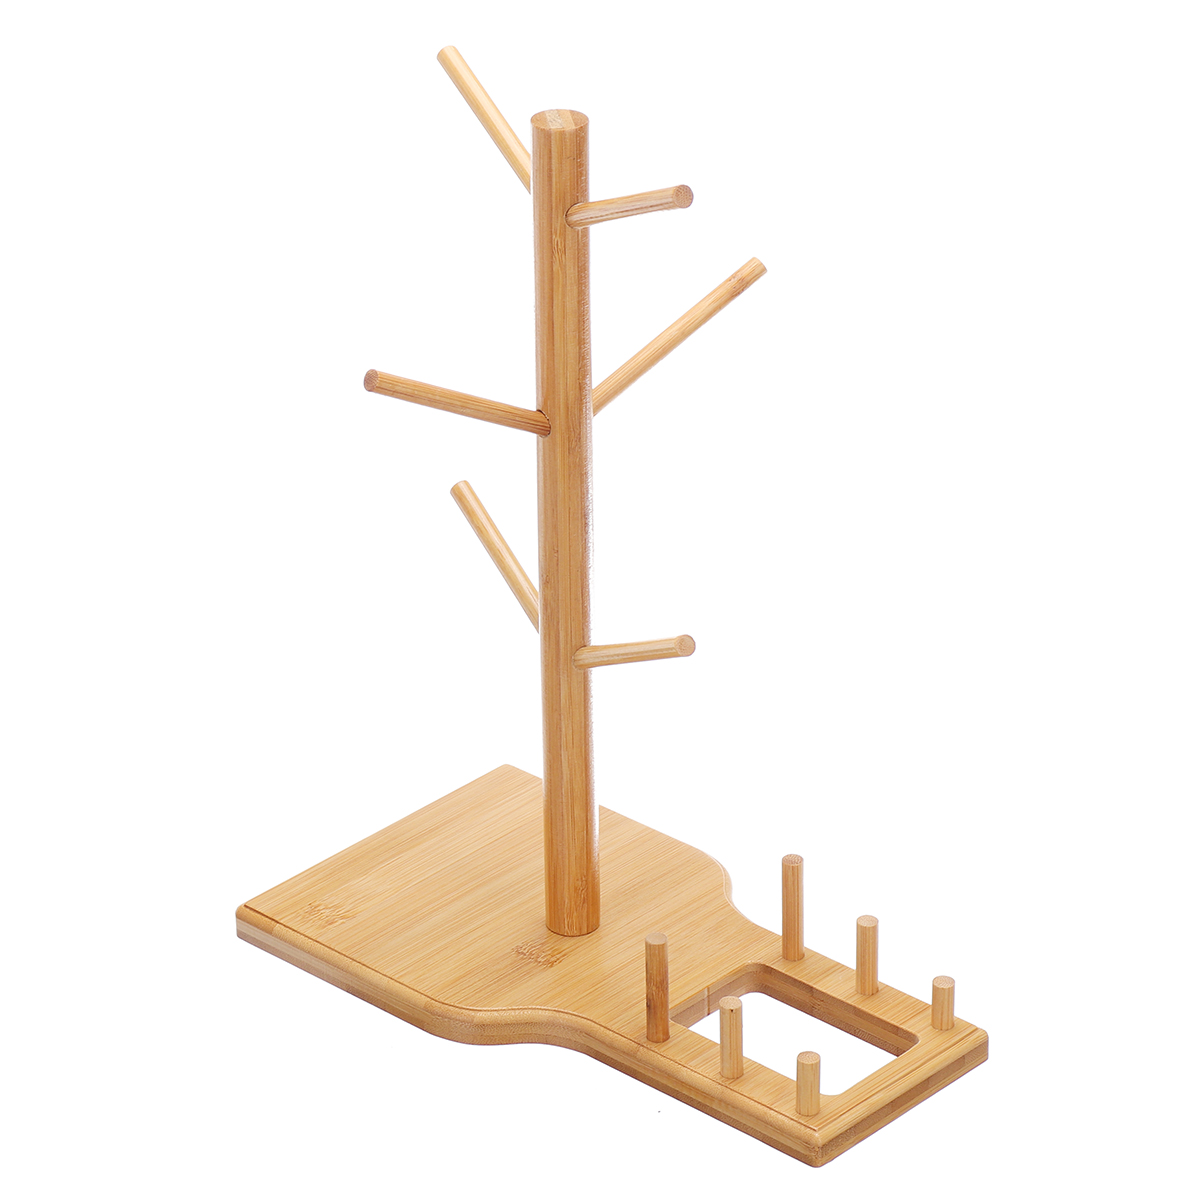 Bamboo-Cup-Mat-Water-Cup-Storage-Rack-Creative-Cup-Organizing-Shelf-Household-Office-Living-Wooden-G-1756070-4